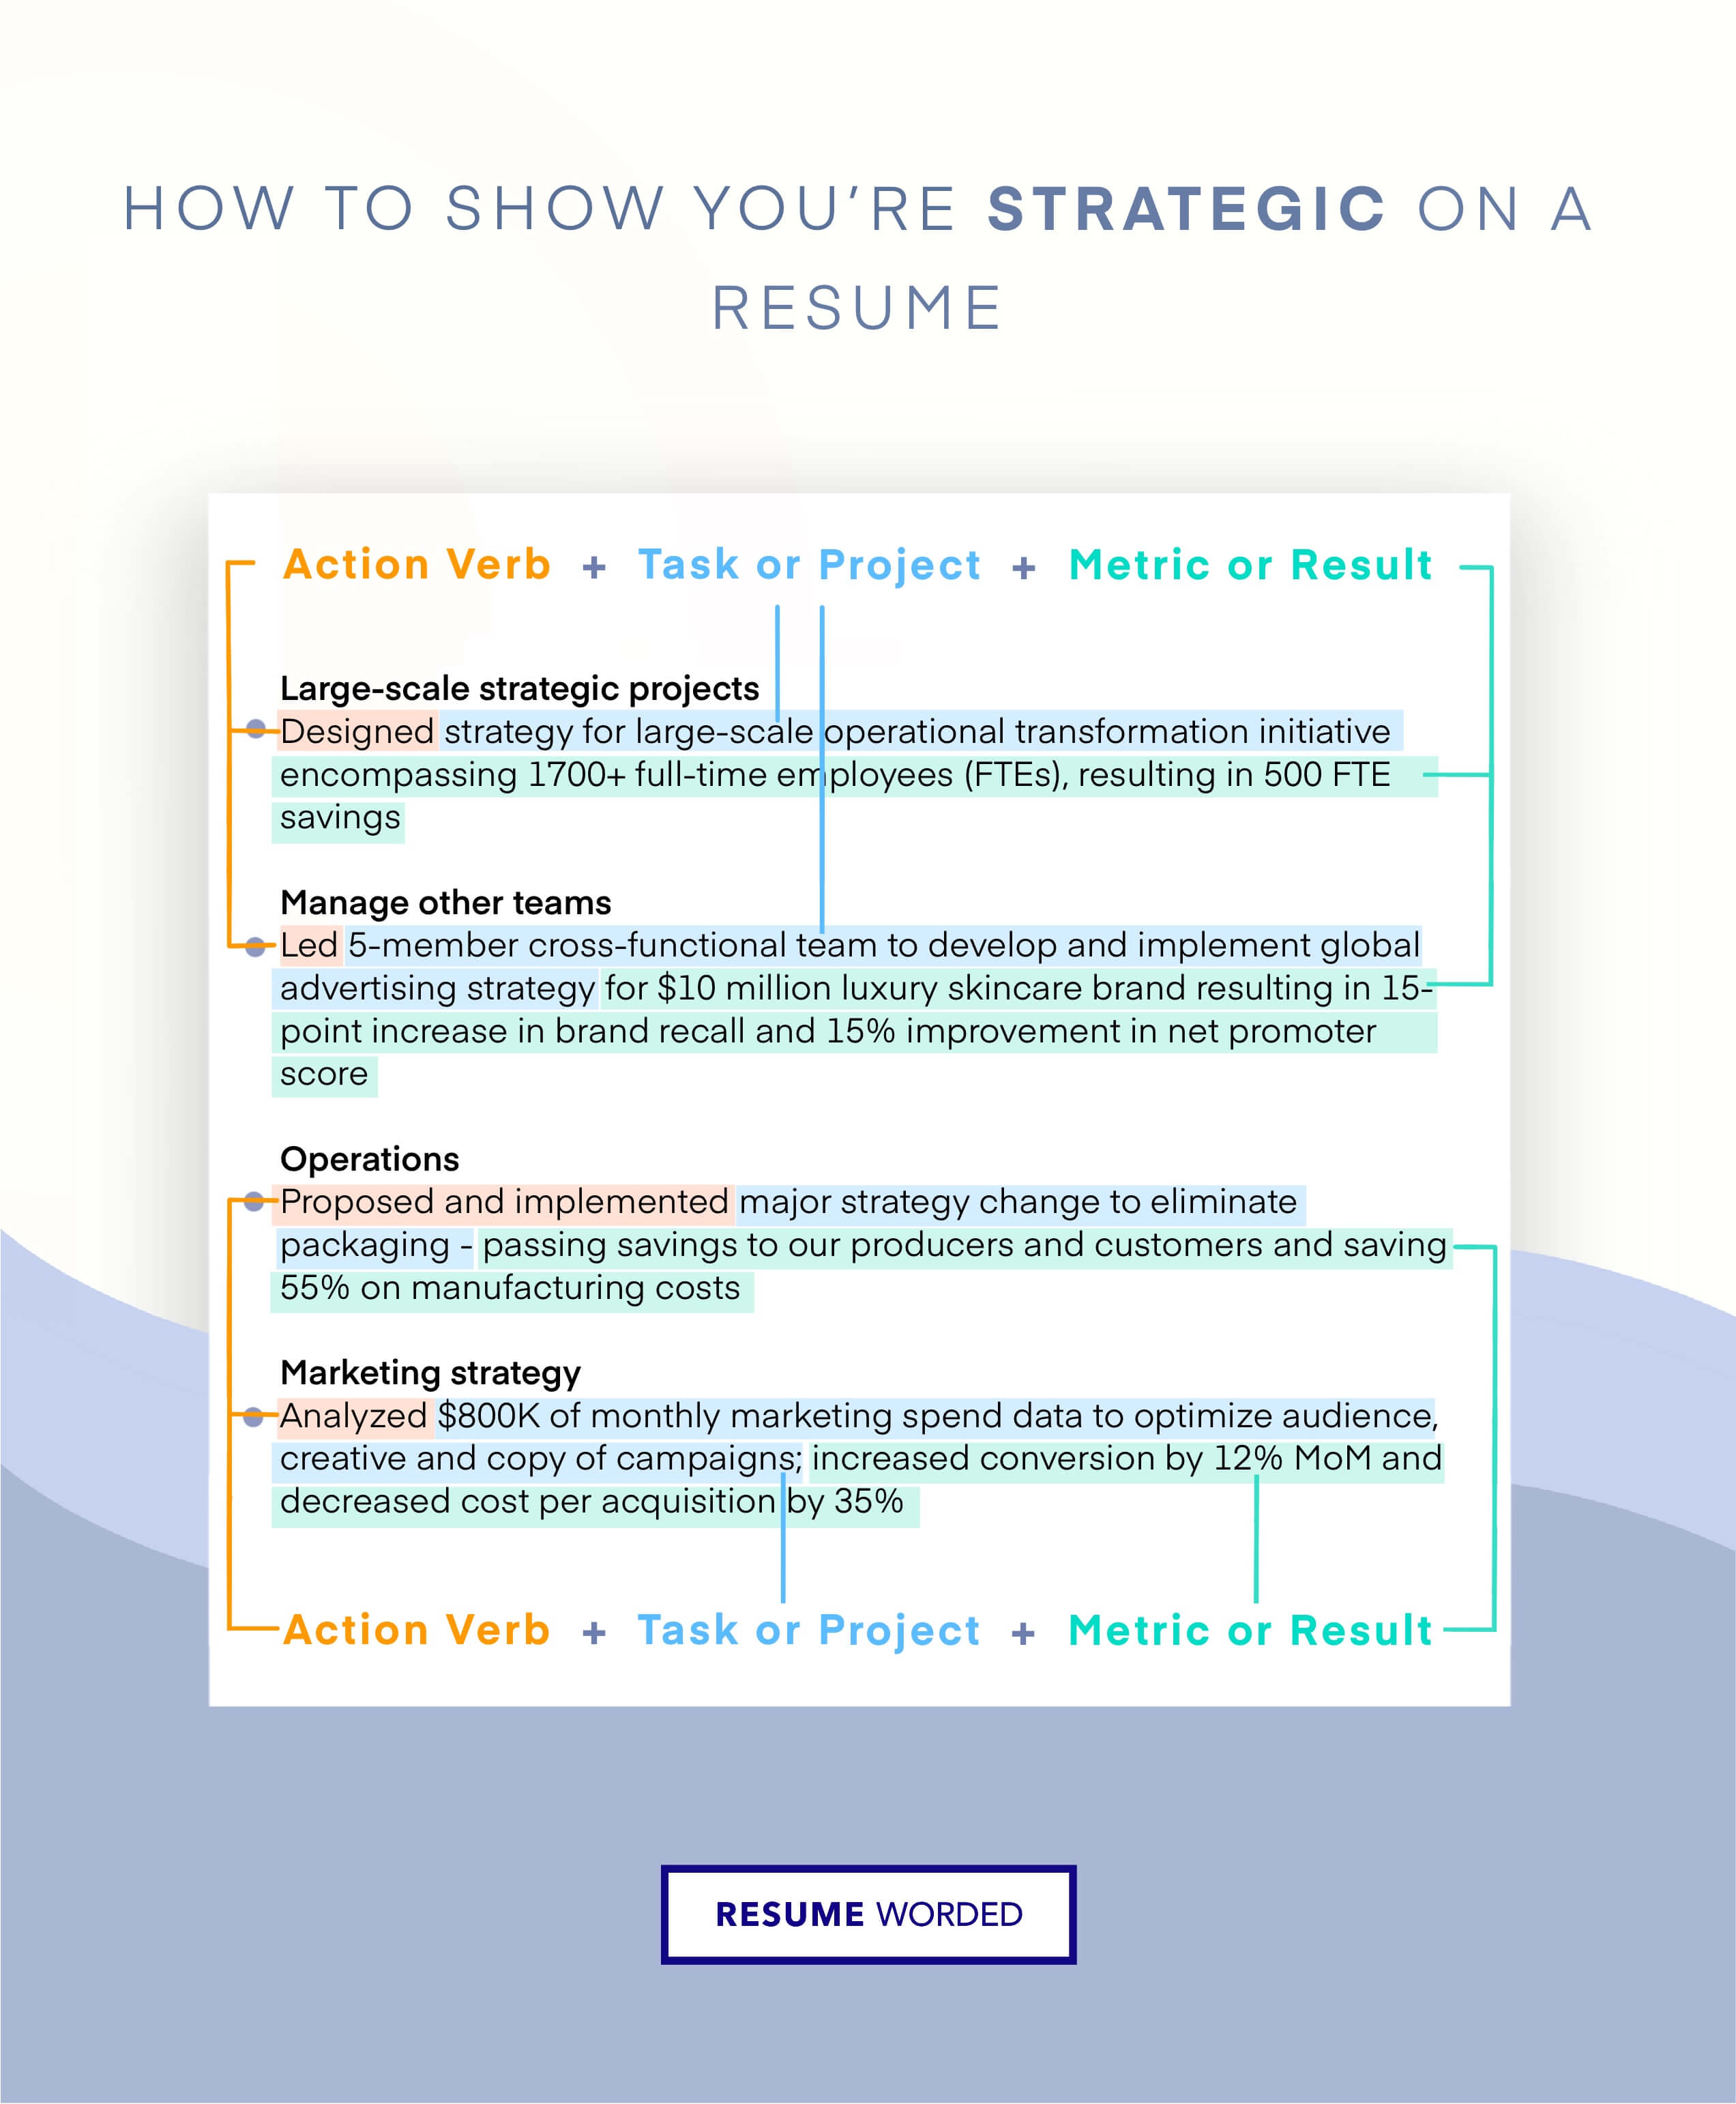 Showcase your strategic initiatives - Operations Manager CV